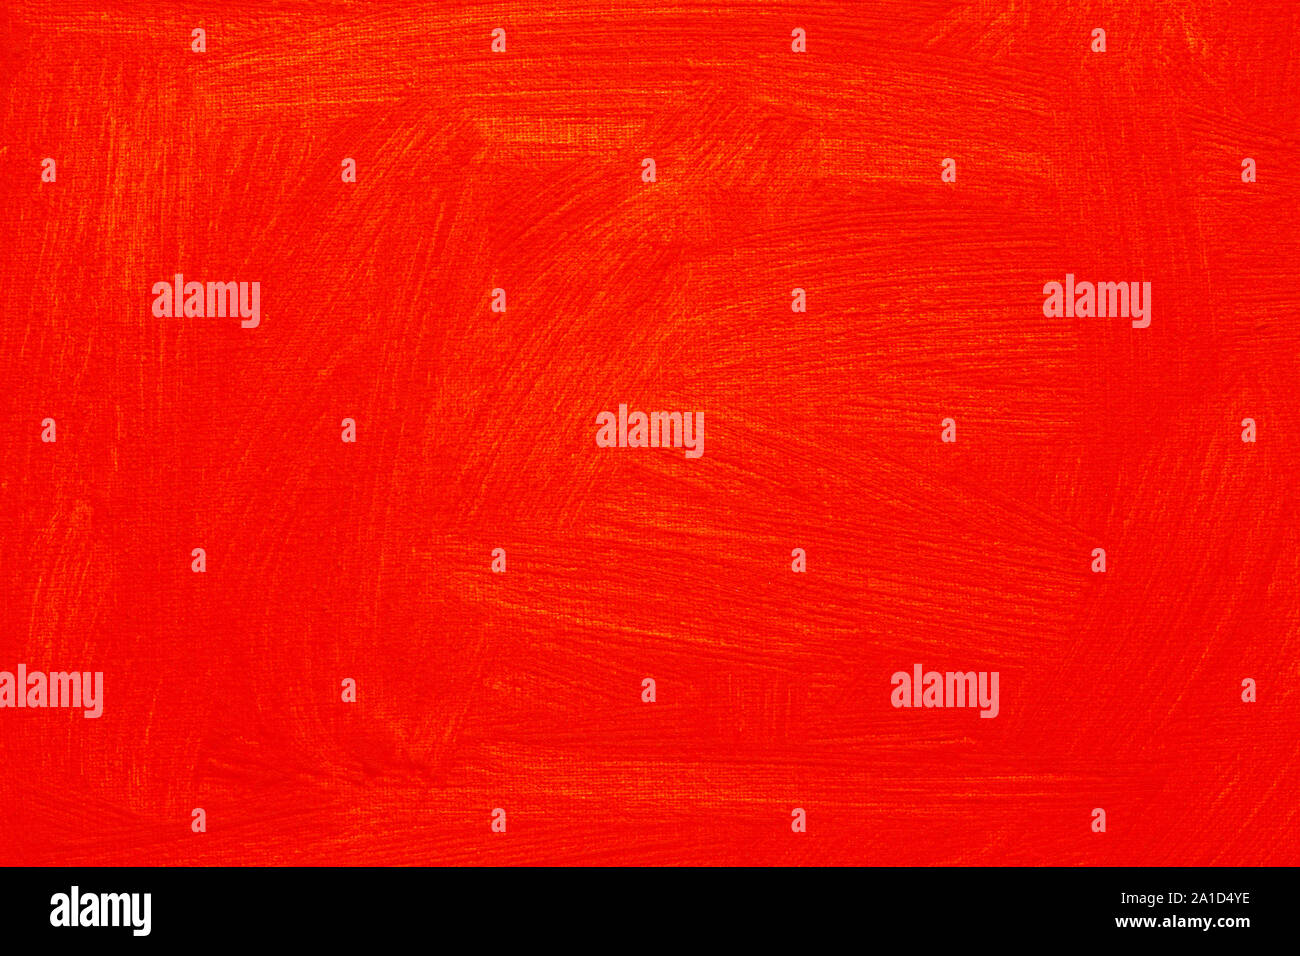 Abstract red orange painted full frame background, real oil painting on canvas by hand Stock Photo